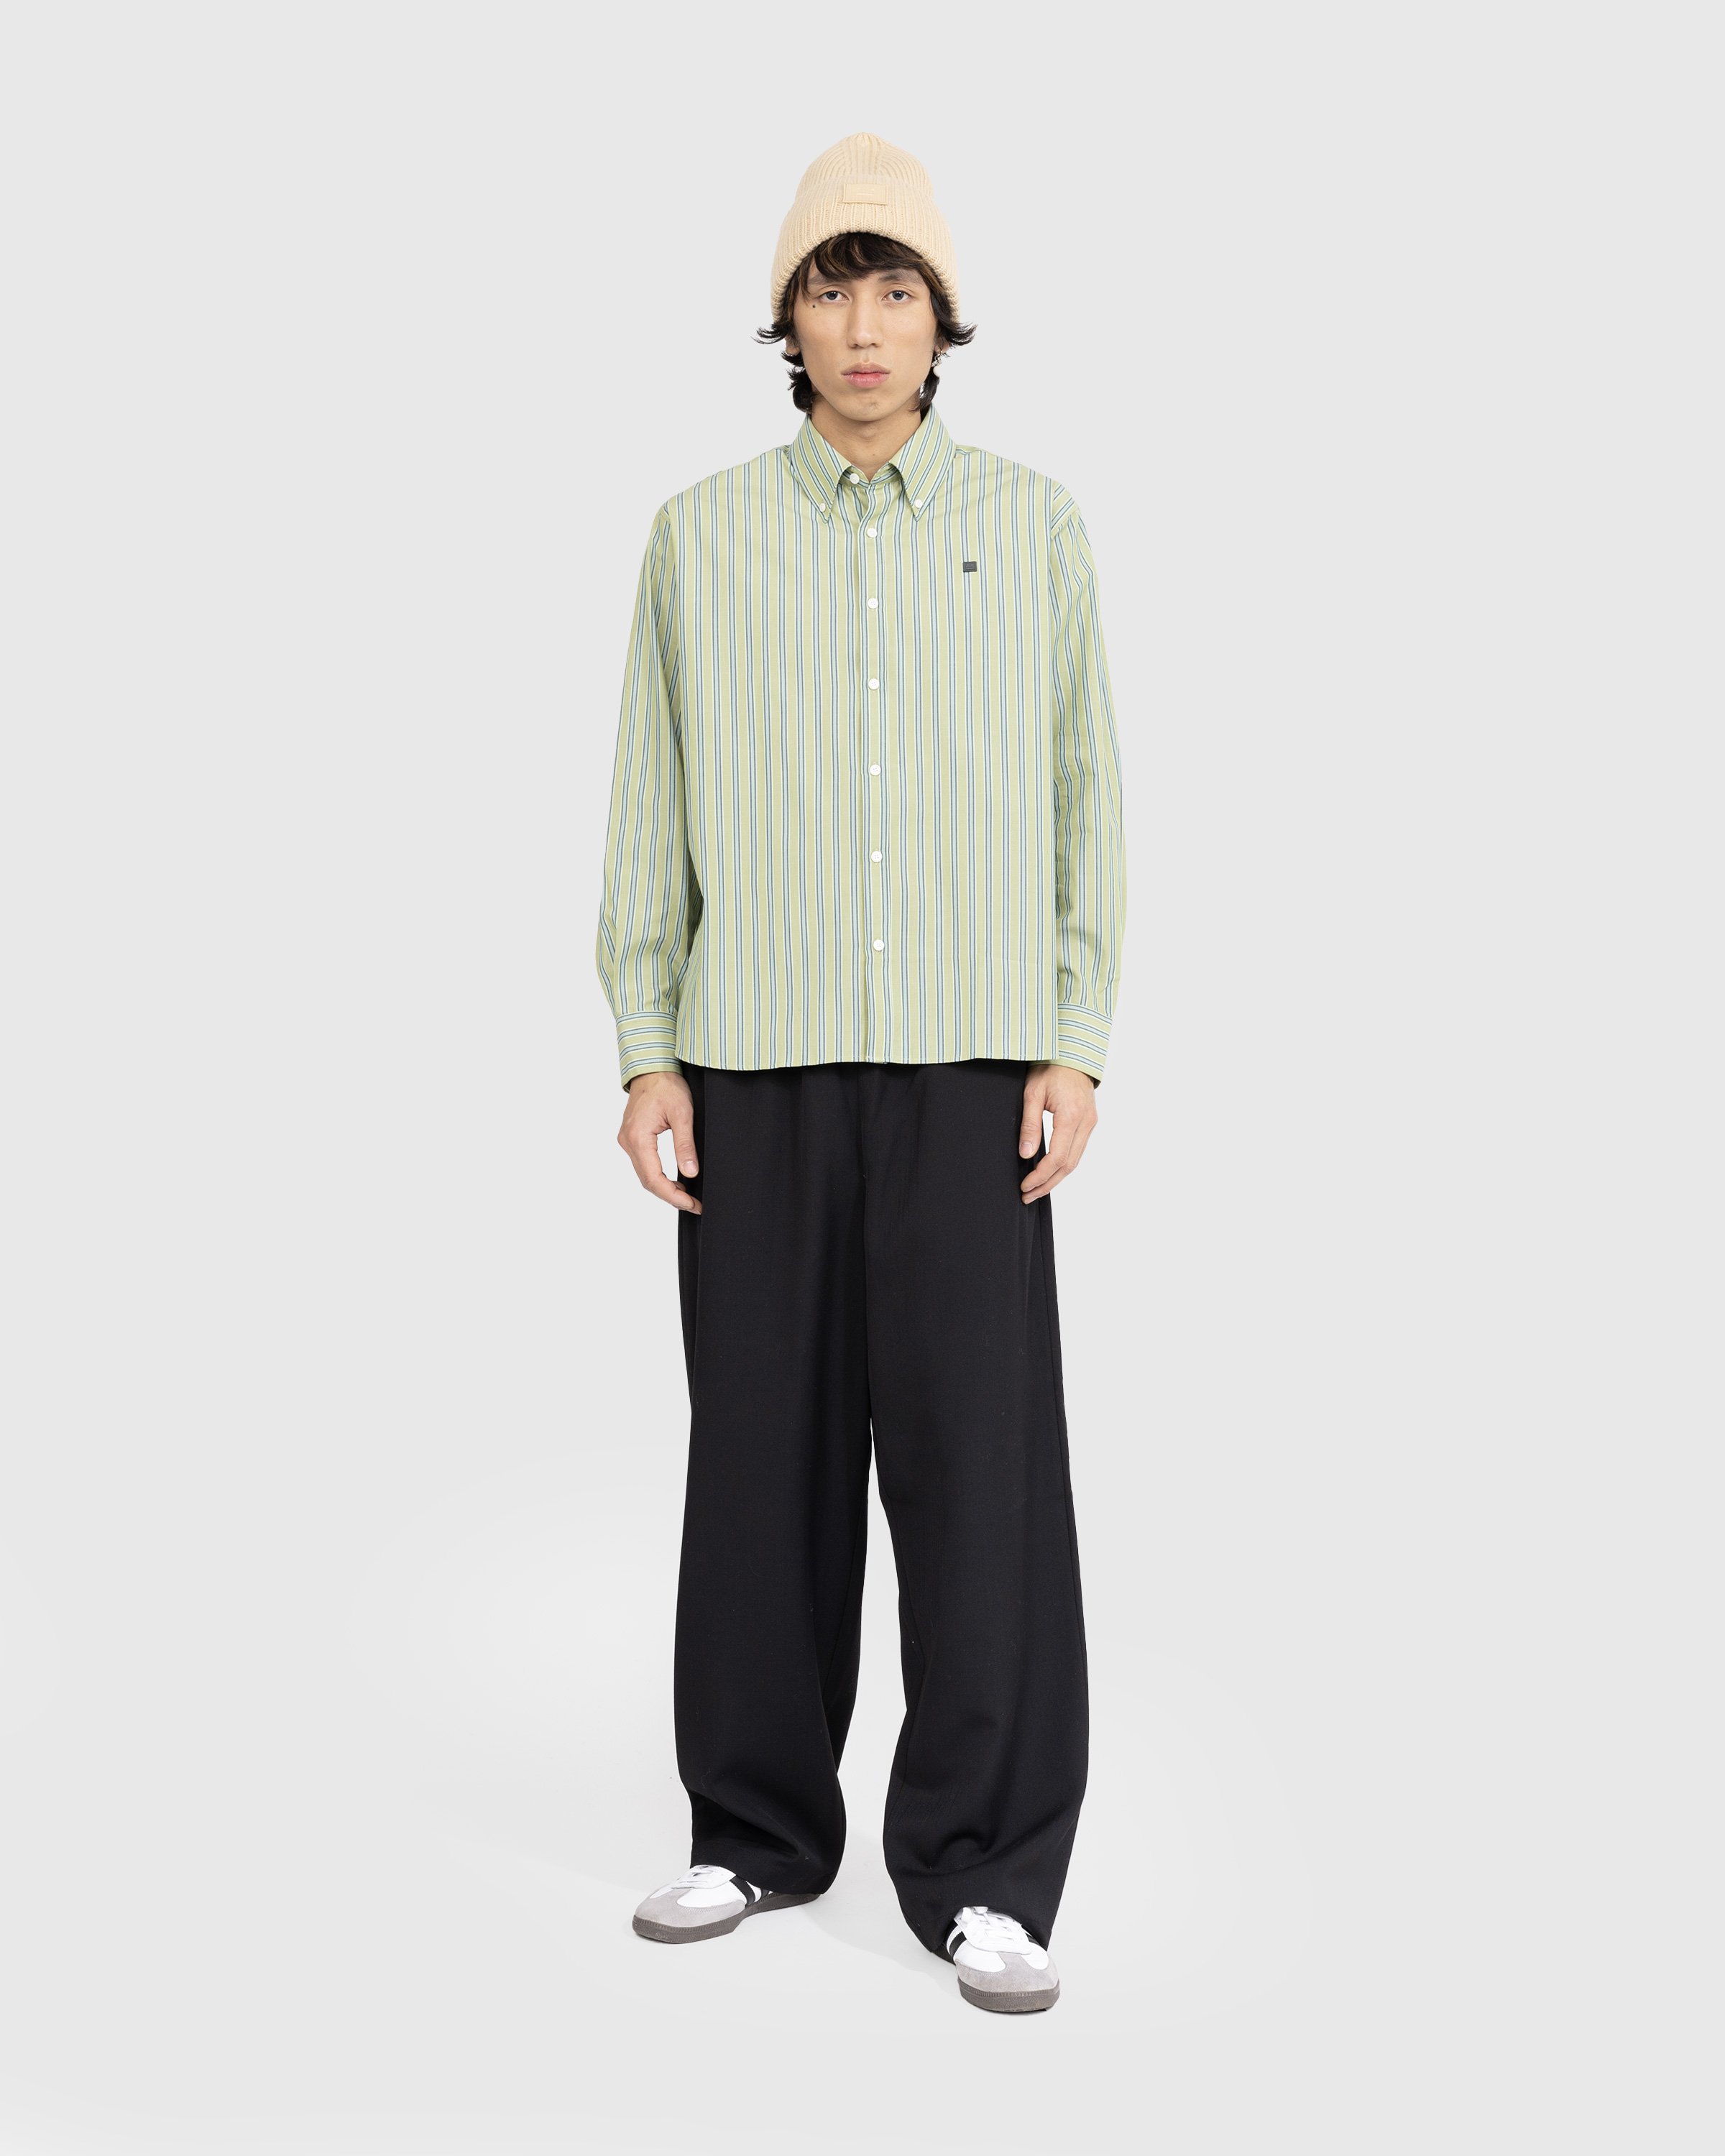 Acne Studios - Tailored Trousers Black - Clothing - Black - Image 3